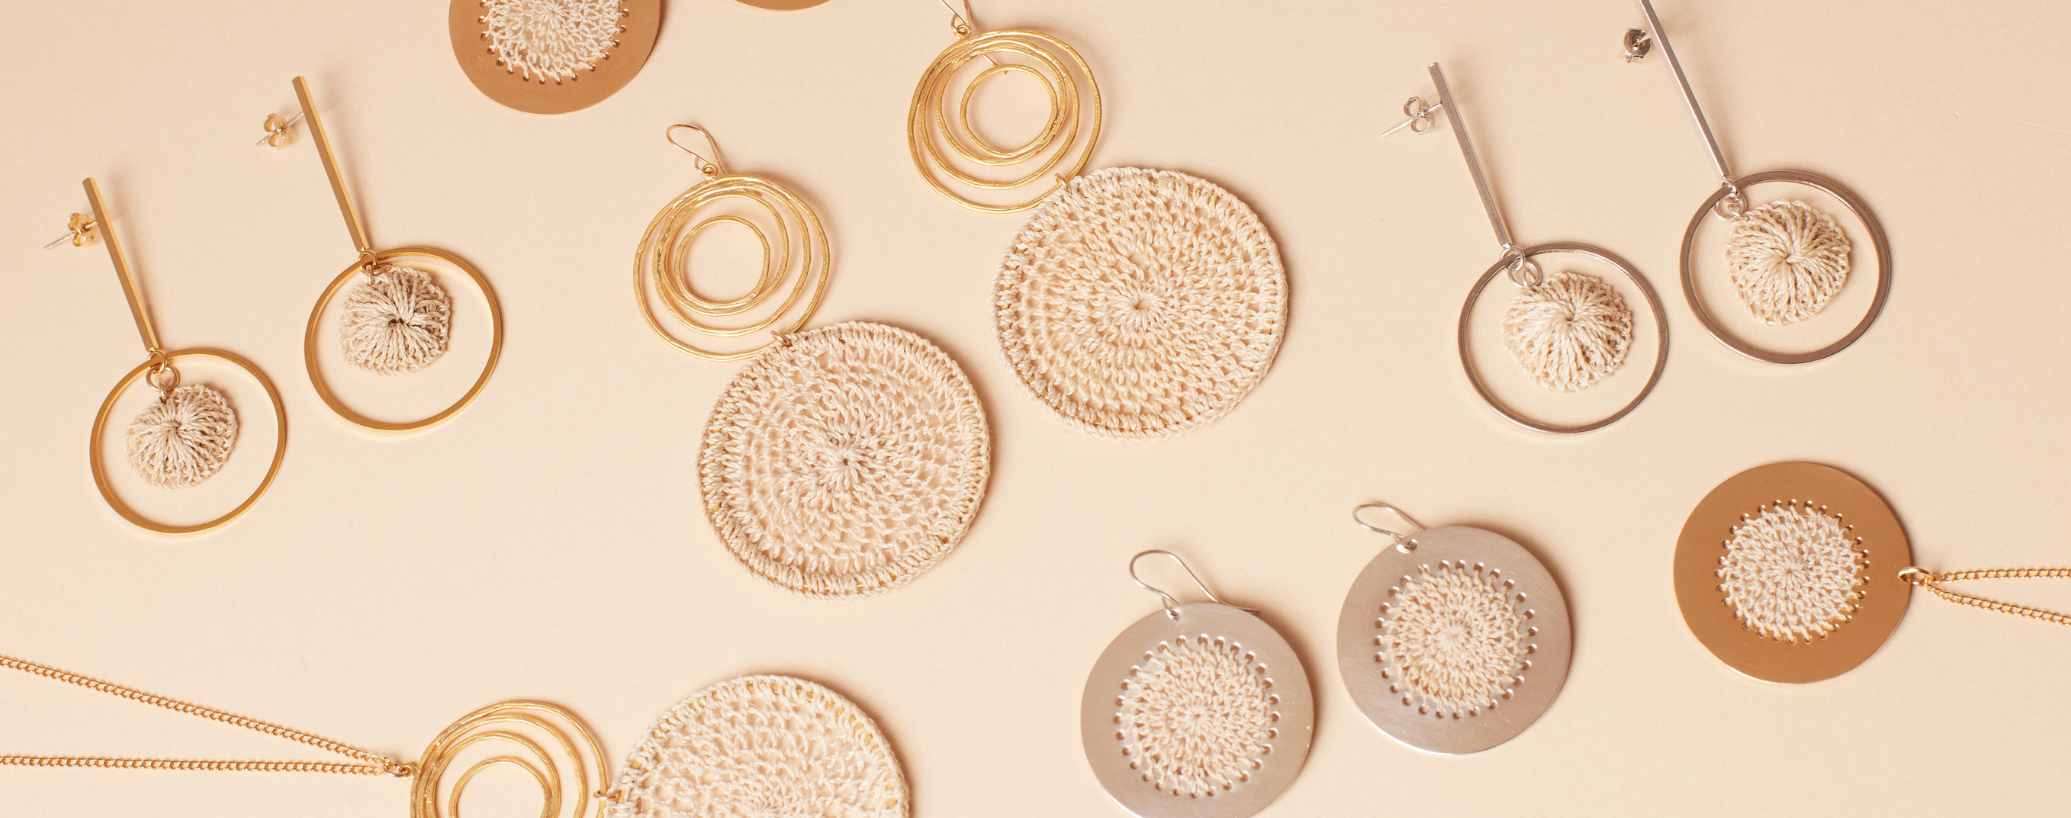 The Kalea Collection of handwoven jewellery capturing circles, swirls and discs.